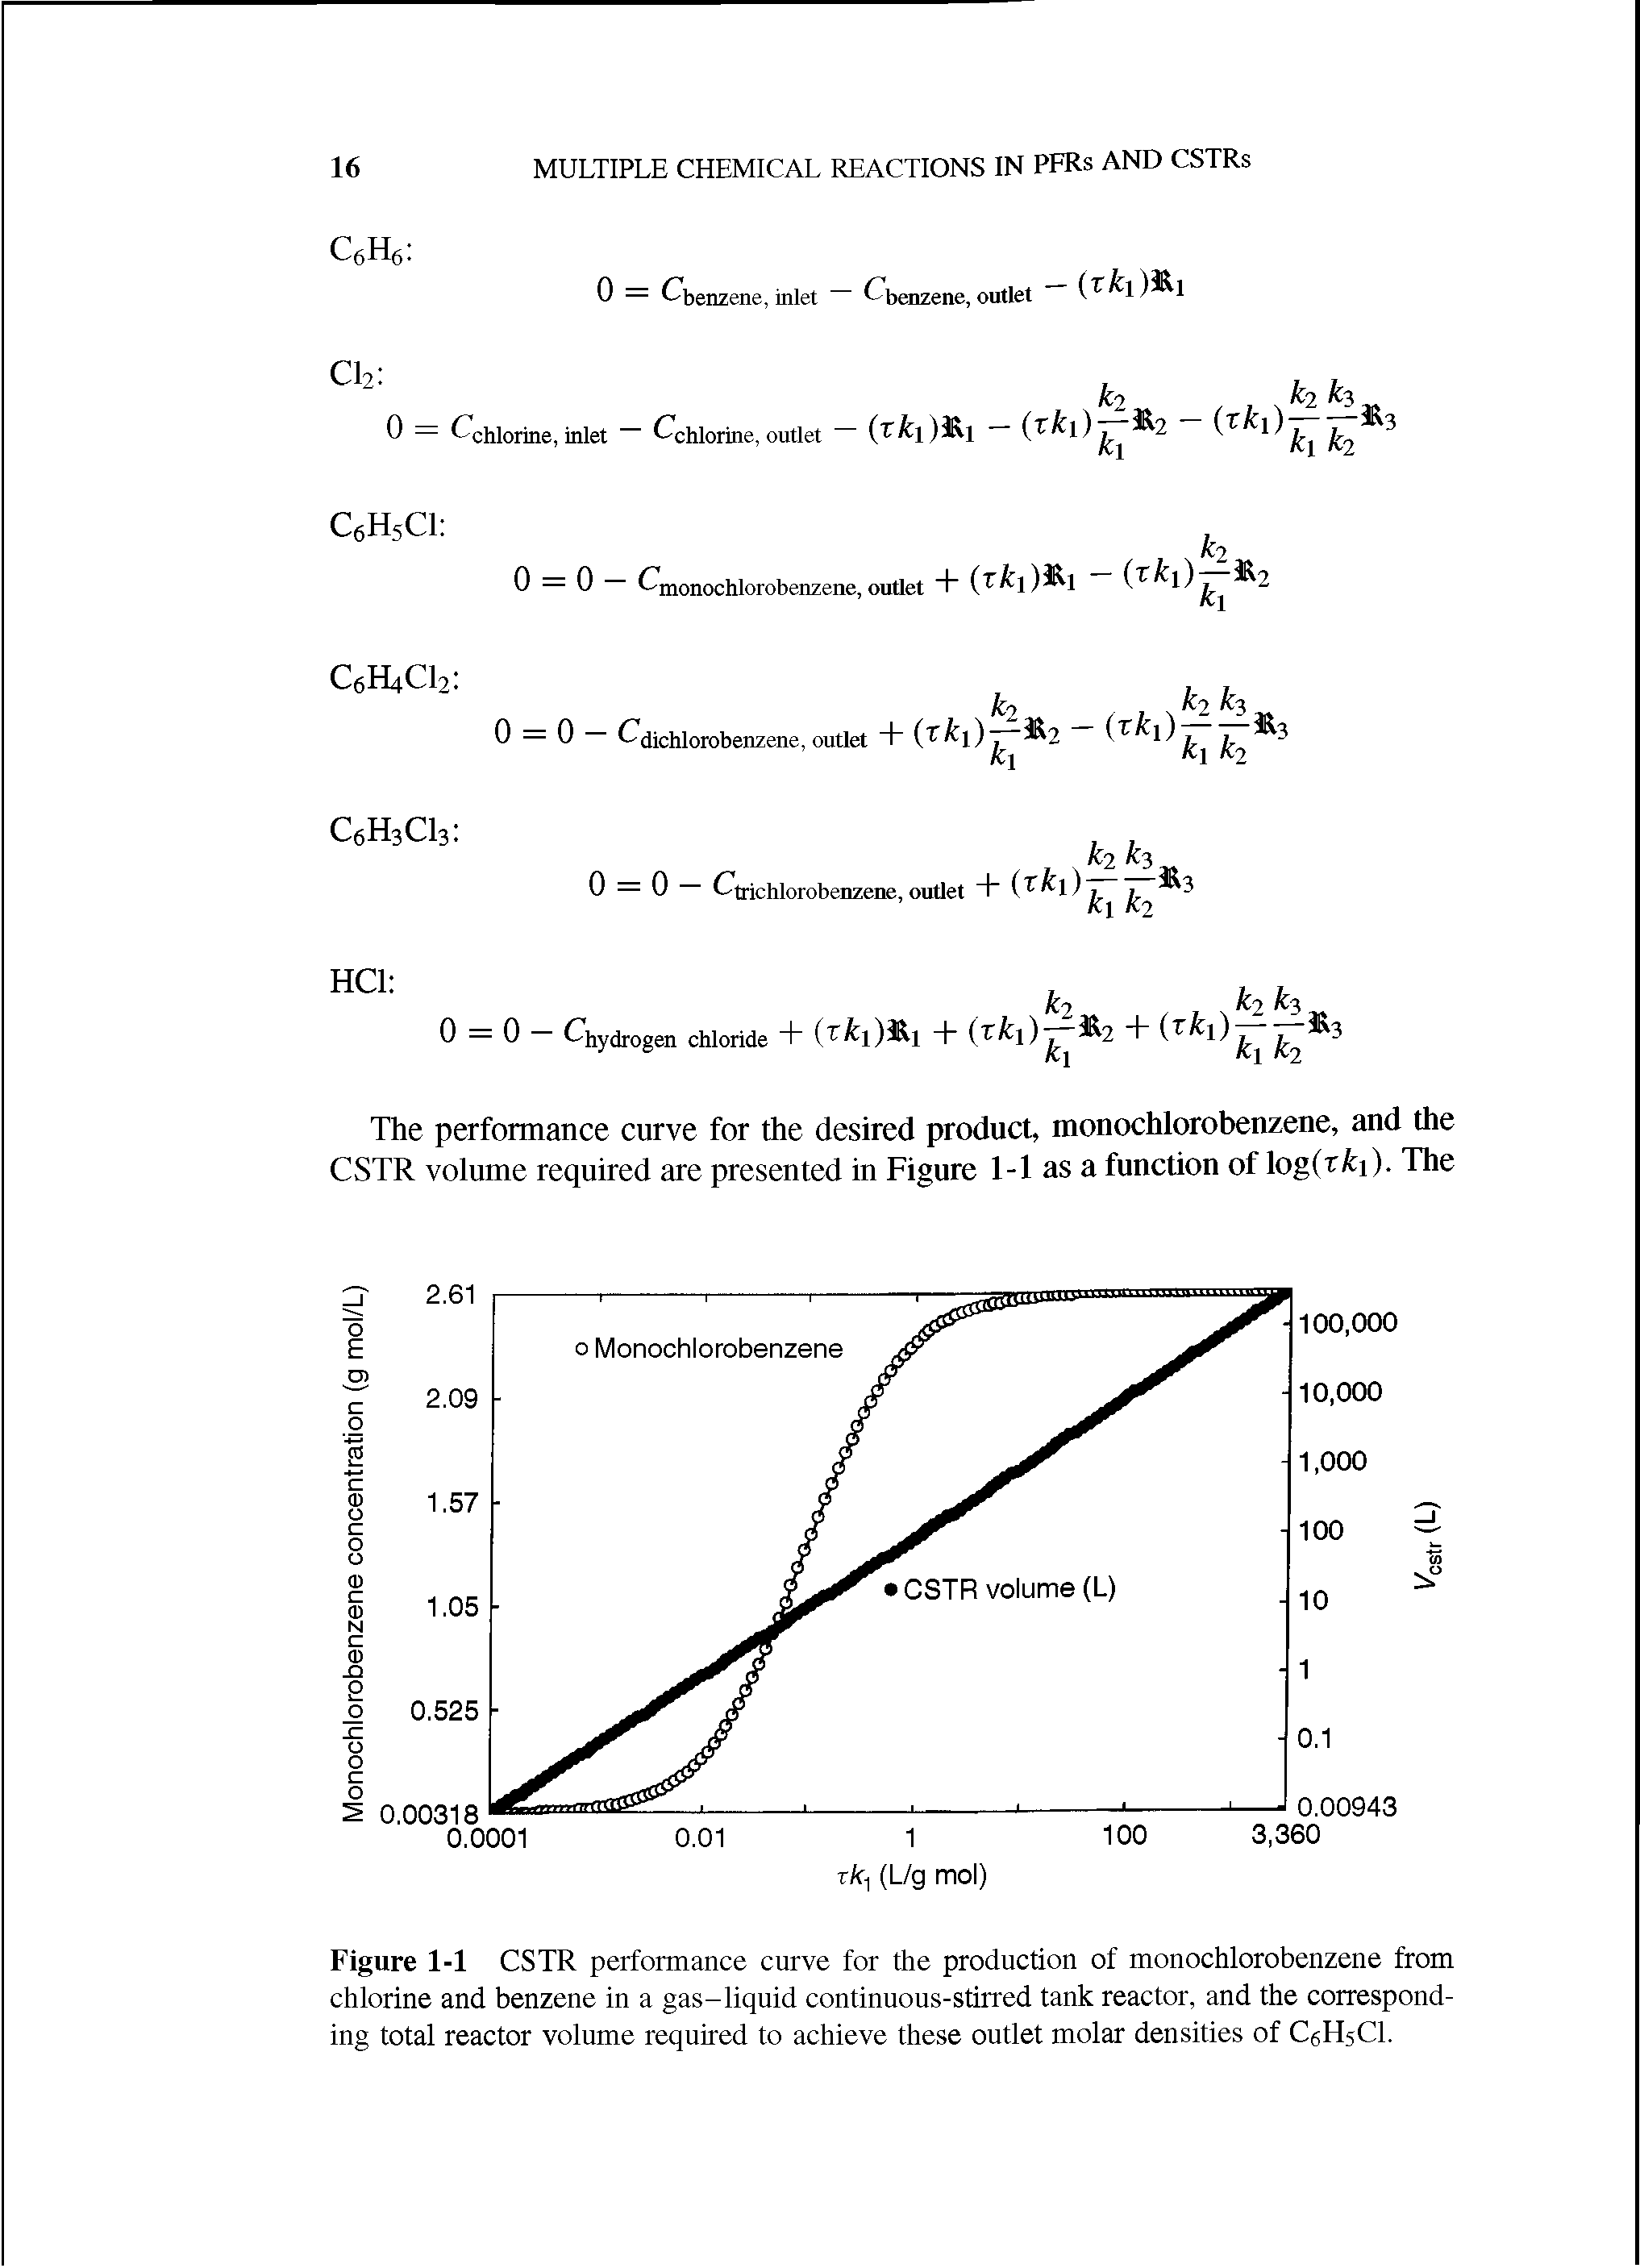 Figure 1-1 CSTR performance curve for the production of monochlorobenzene from chlorine and benzene in a gas-liquid continuous-stirred tank reactor, and the corresponding total reactor volume required to achieve these outlet molar densities of CeHsCl.